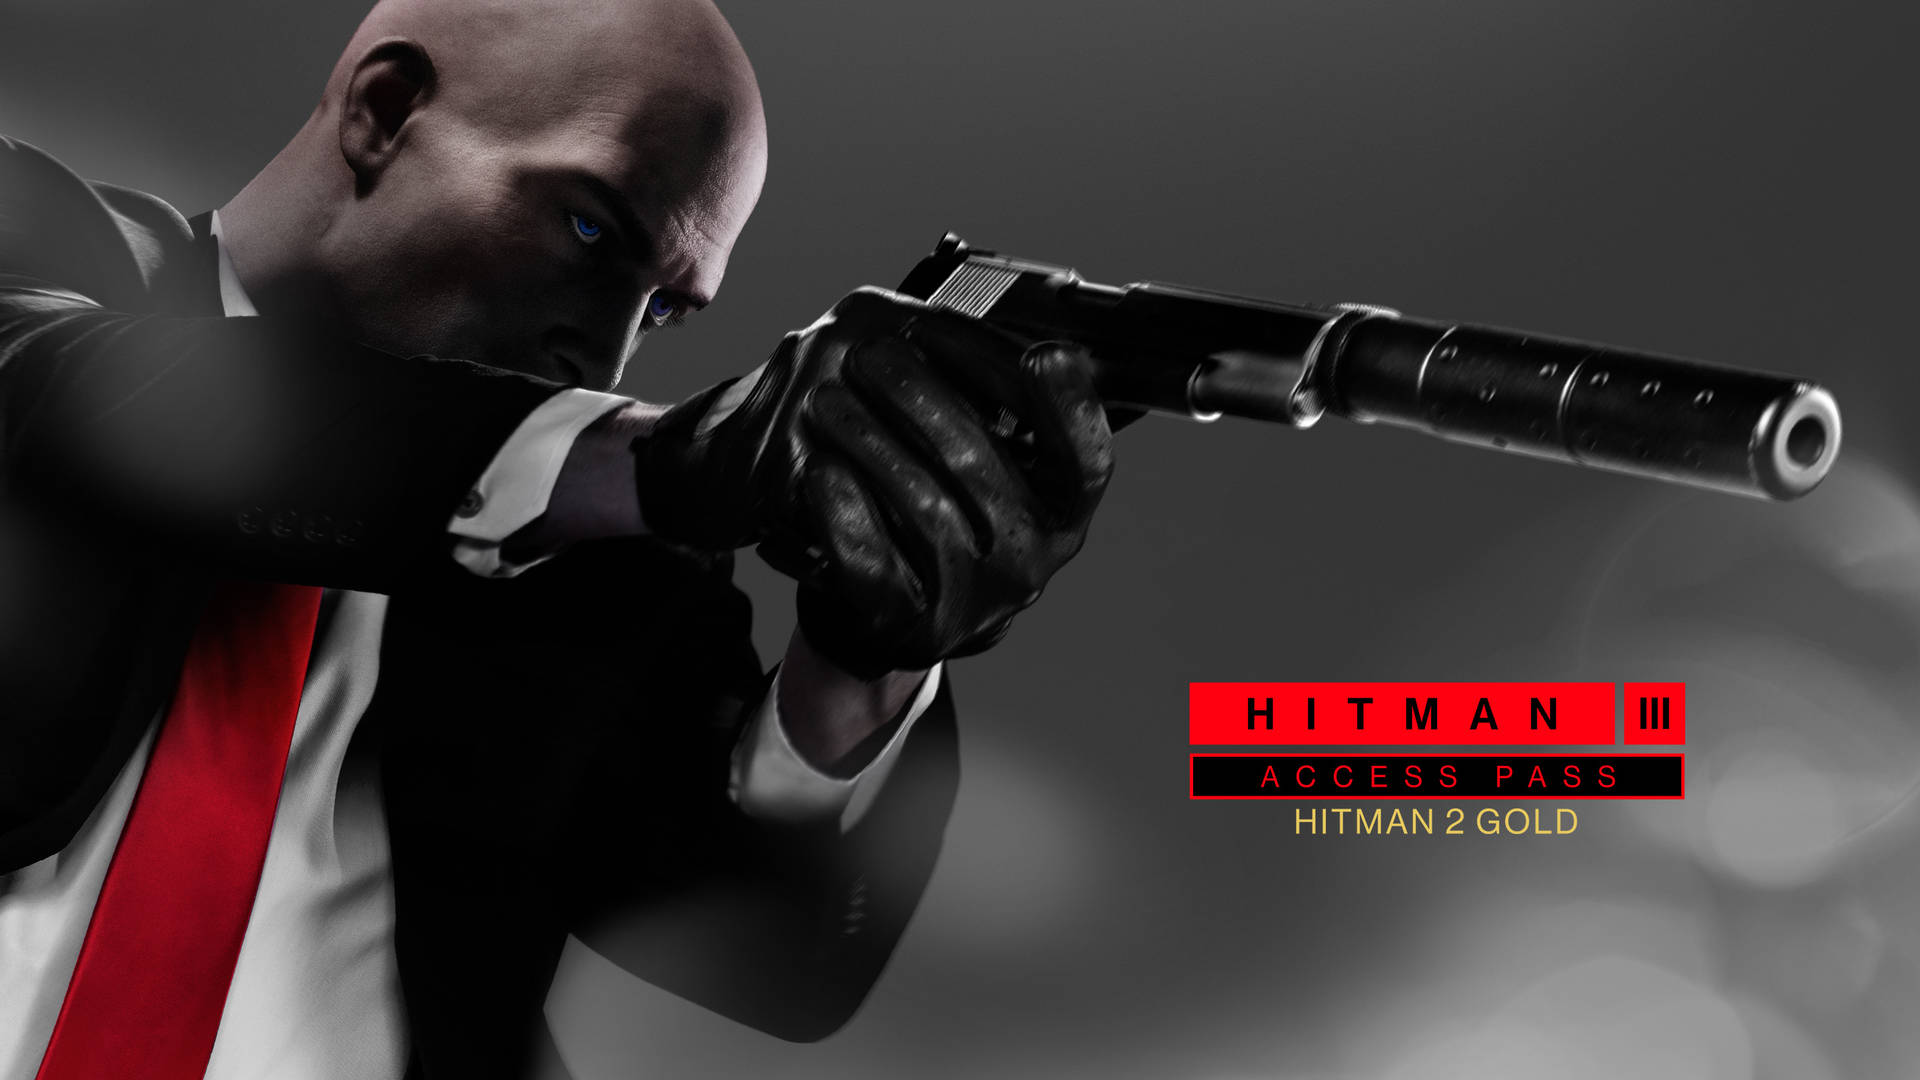 Stealth Gaming Action With Hitman 2 Red Access Pass.